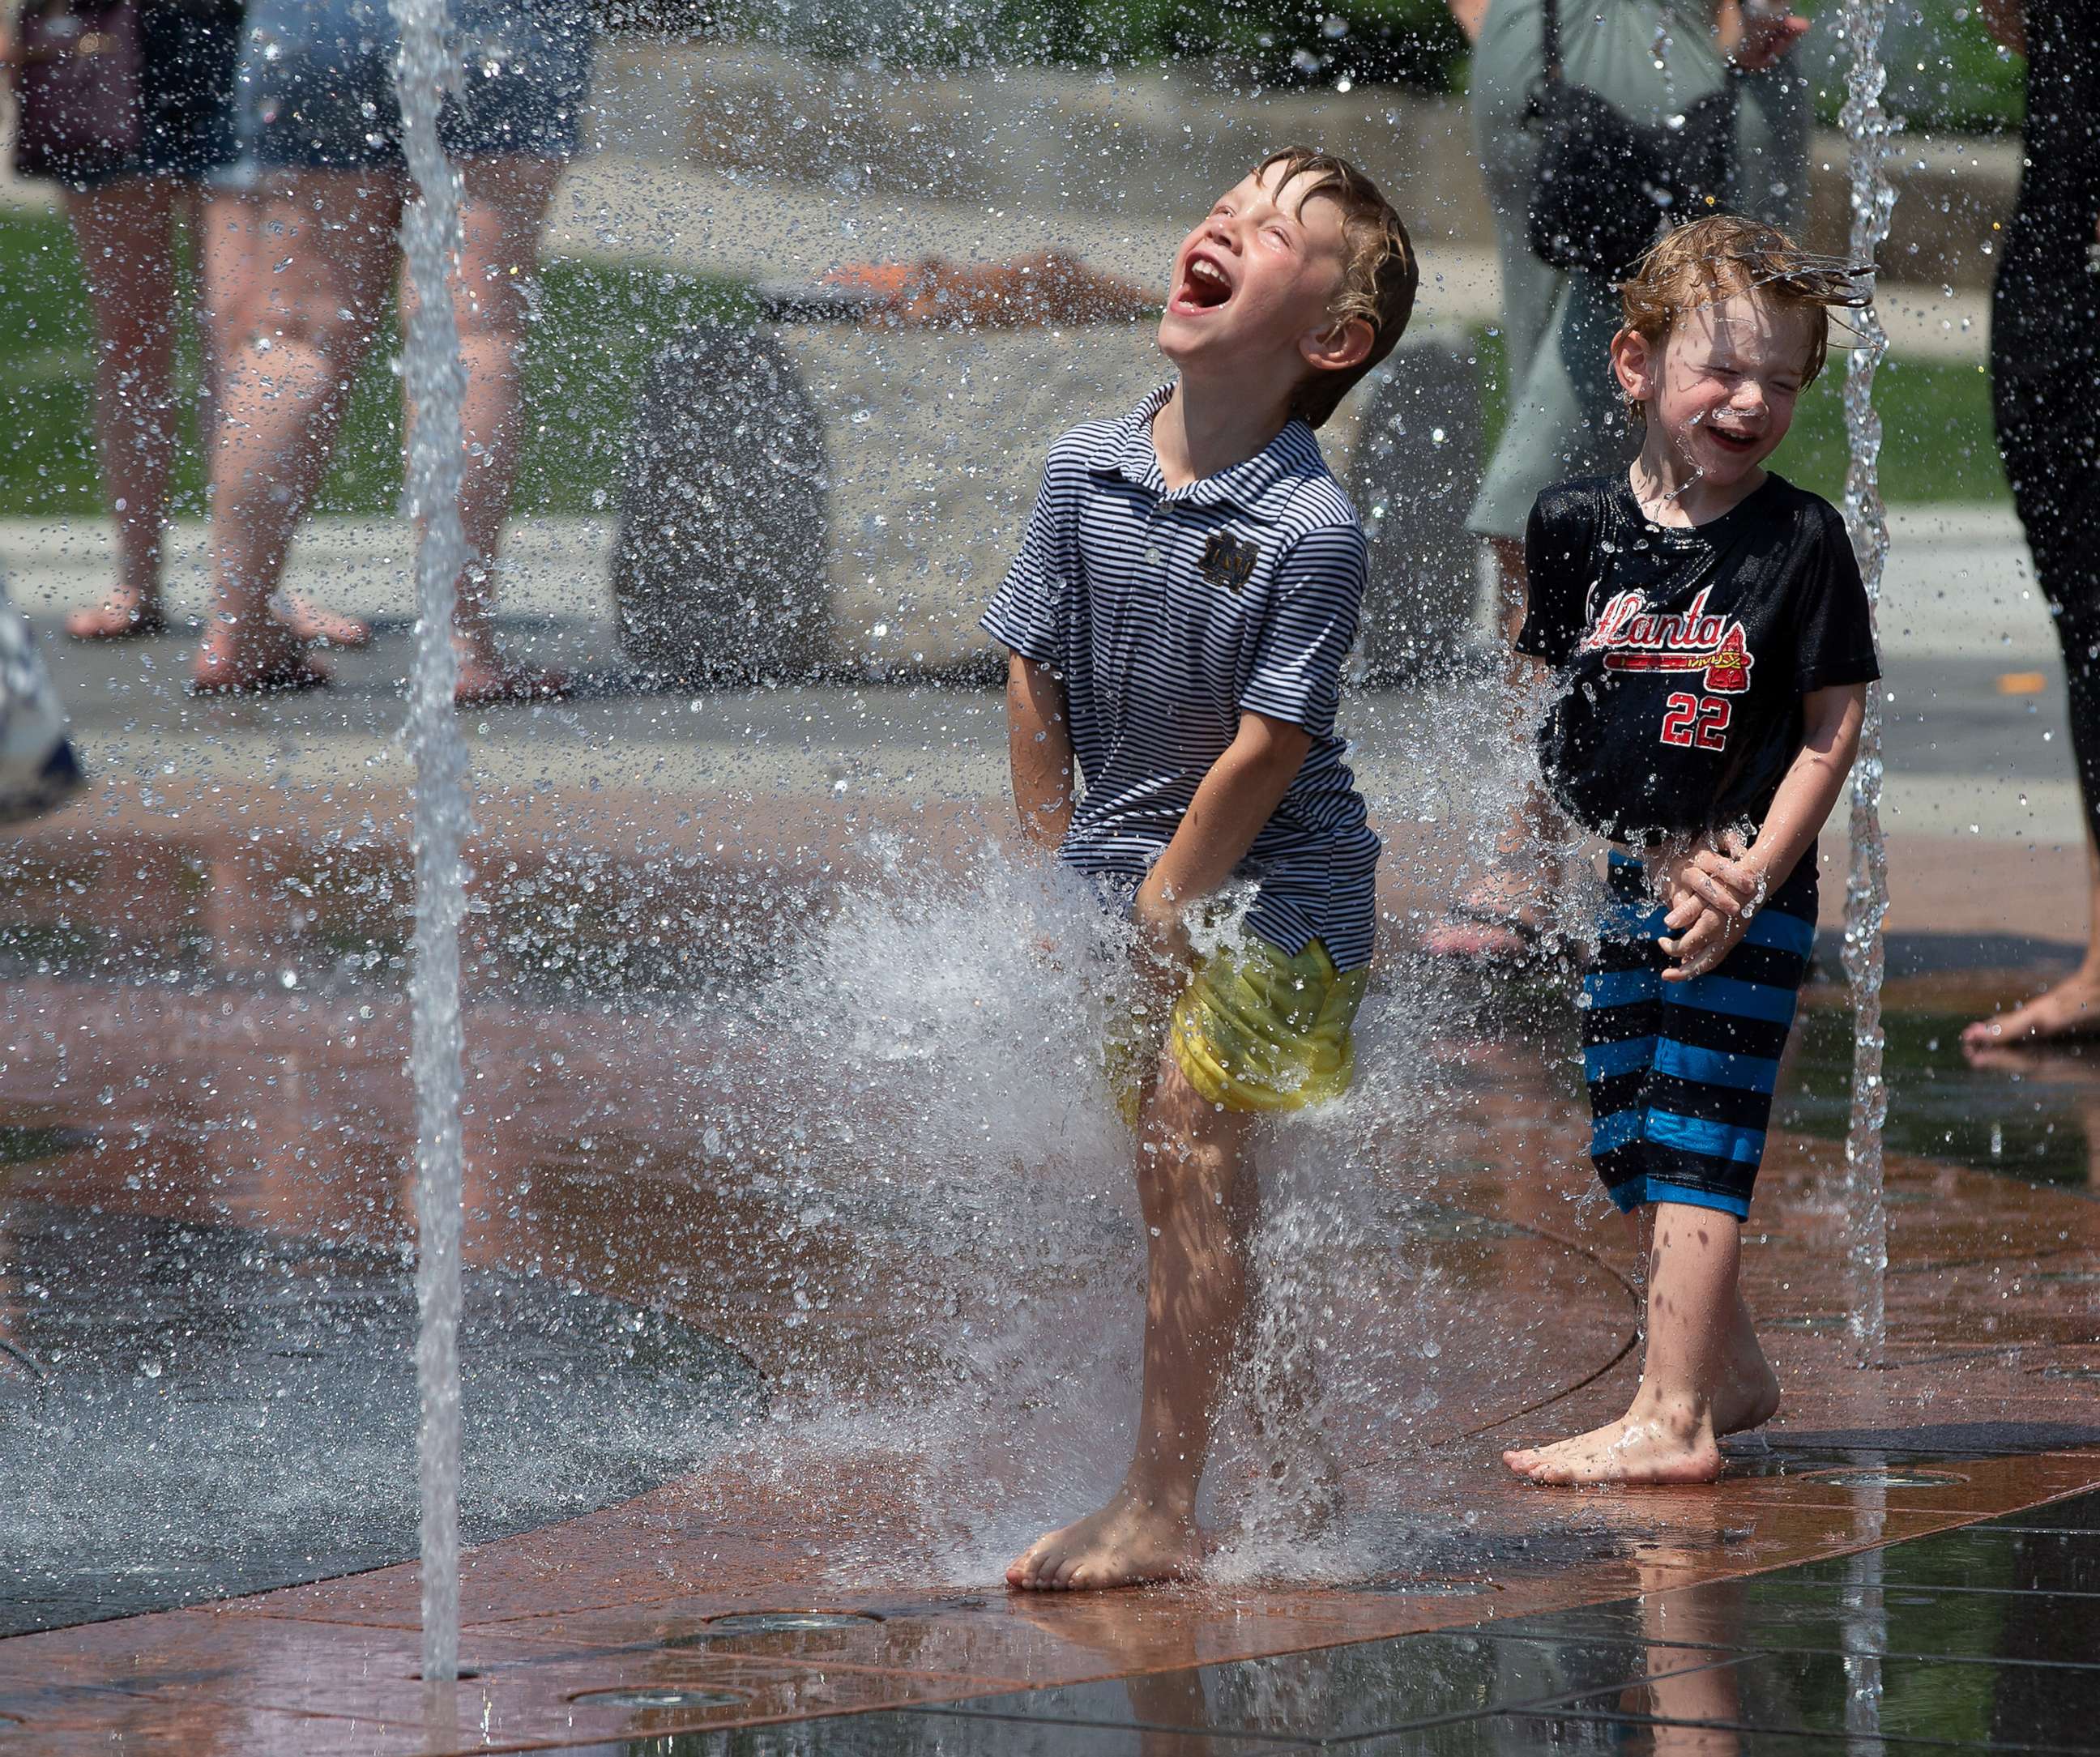 PHOTO: Children play in a water fountain on the Rose Fitzgerald Kennedy Greenway in Boston, on a hot day, June 7, 2021.